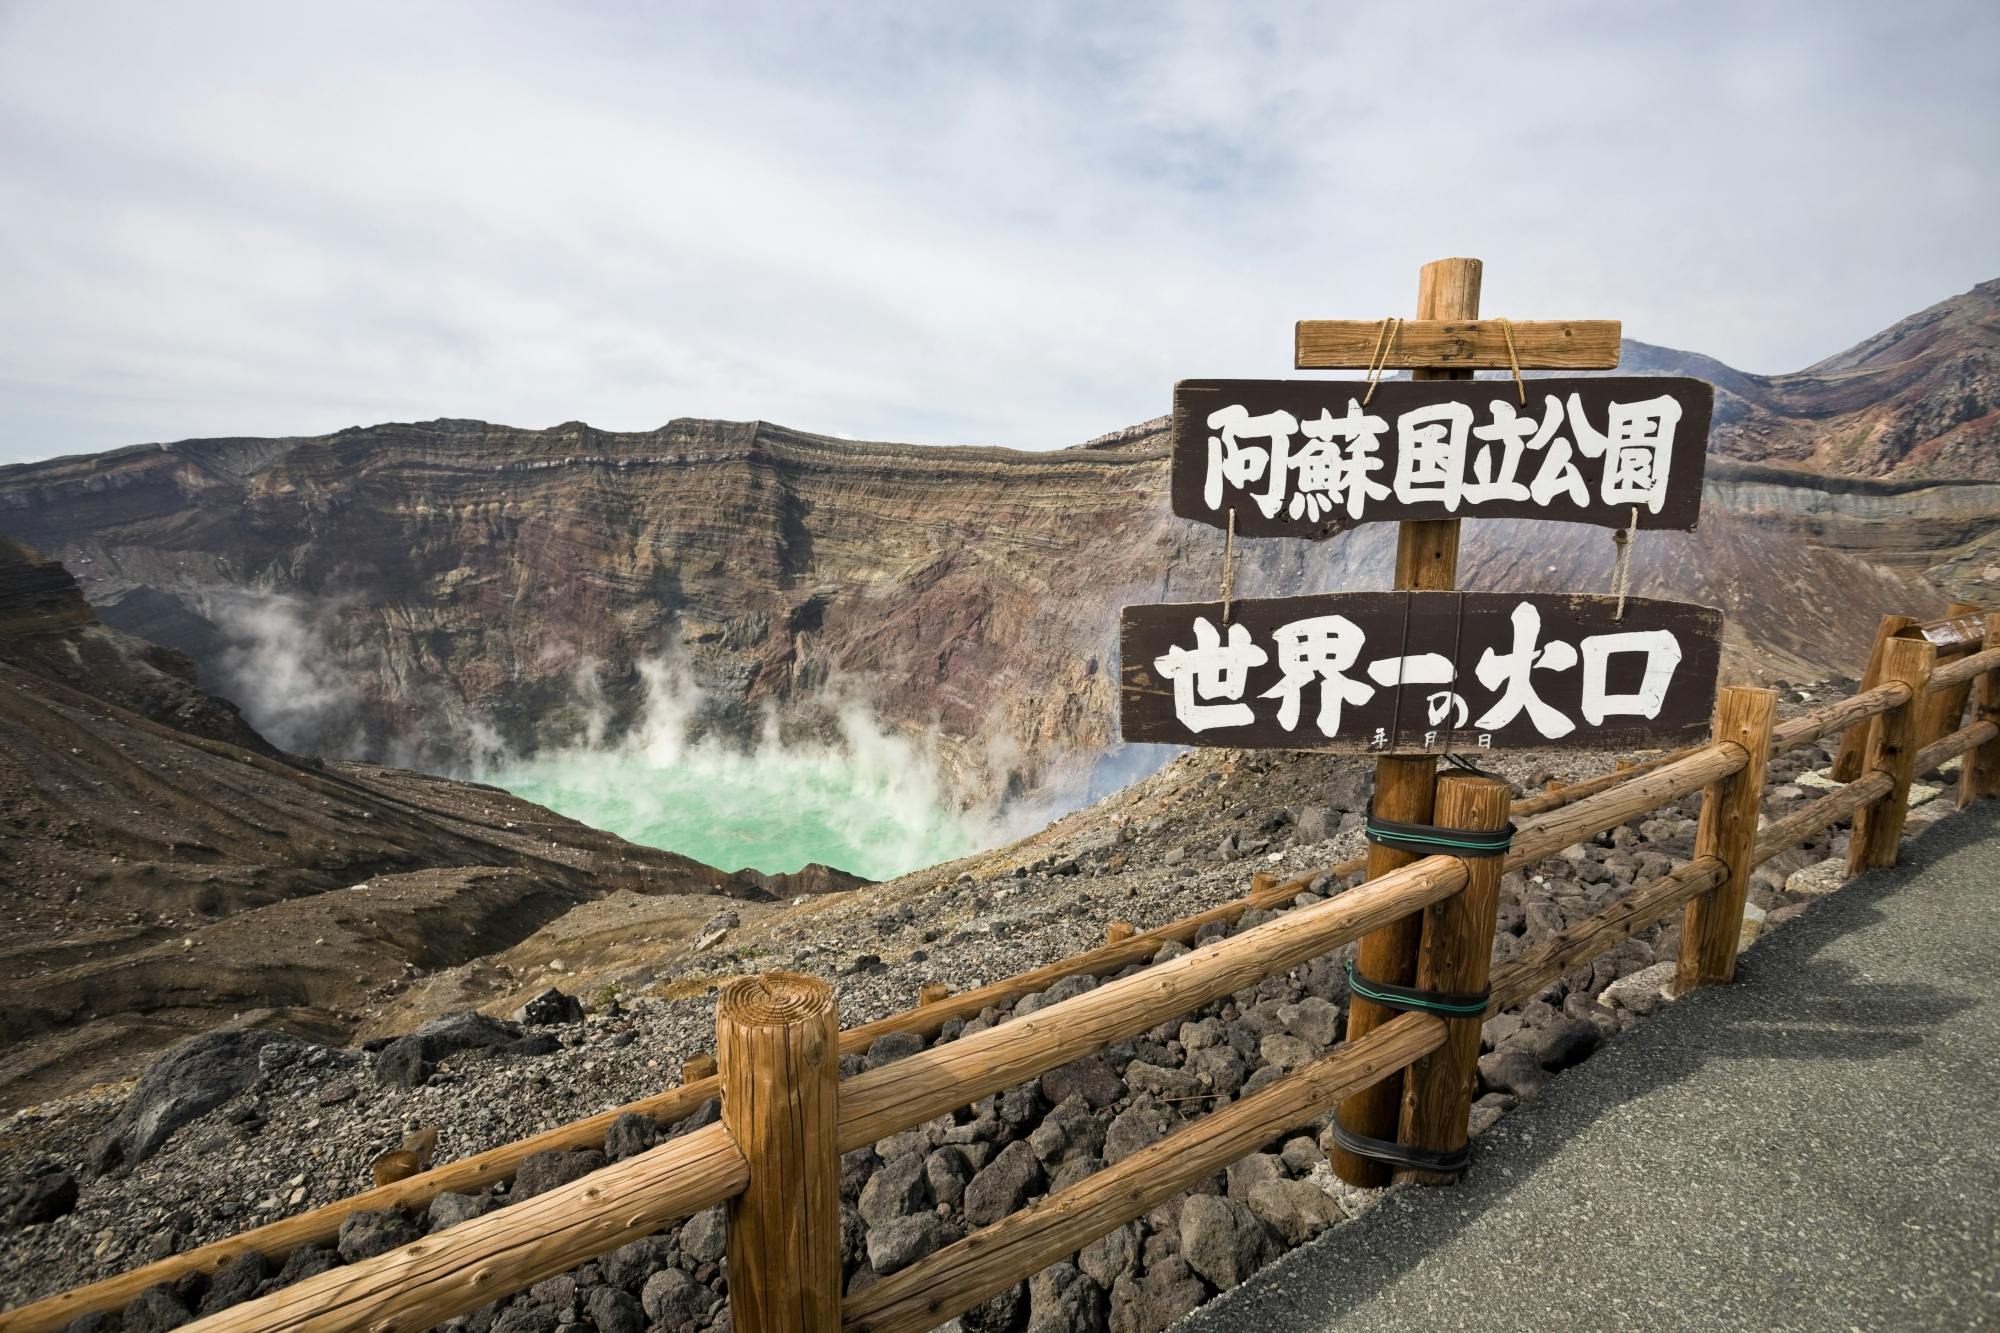 Full day private minibus tour to Mount Aso from Fukuoka Musement